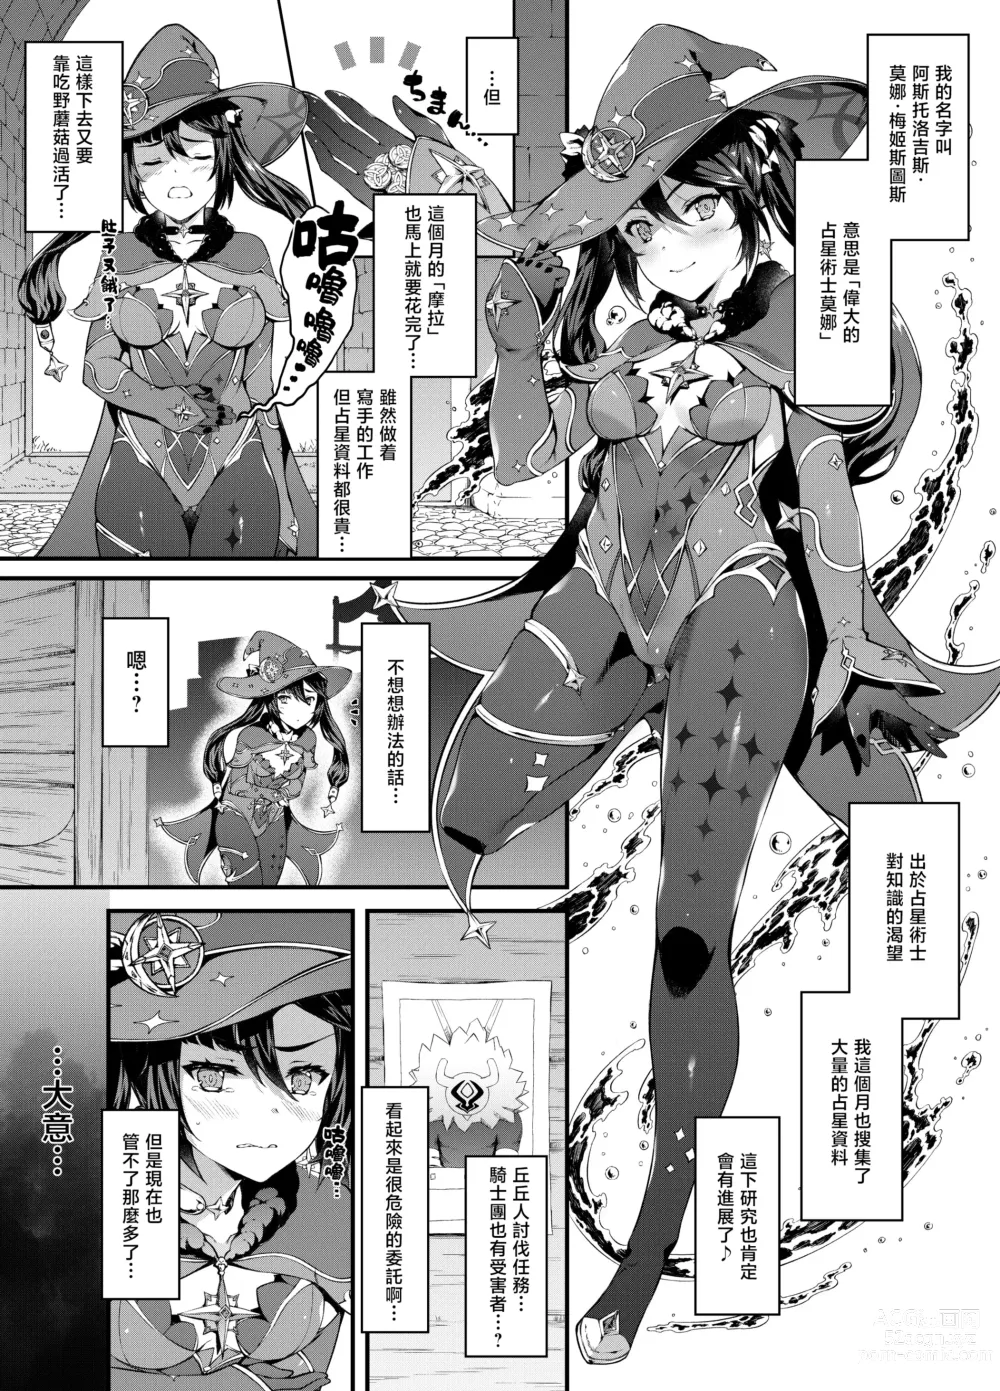 Page 4 of doujinshi 星辰坠落之日